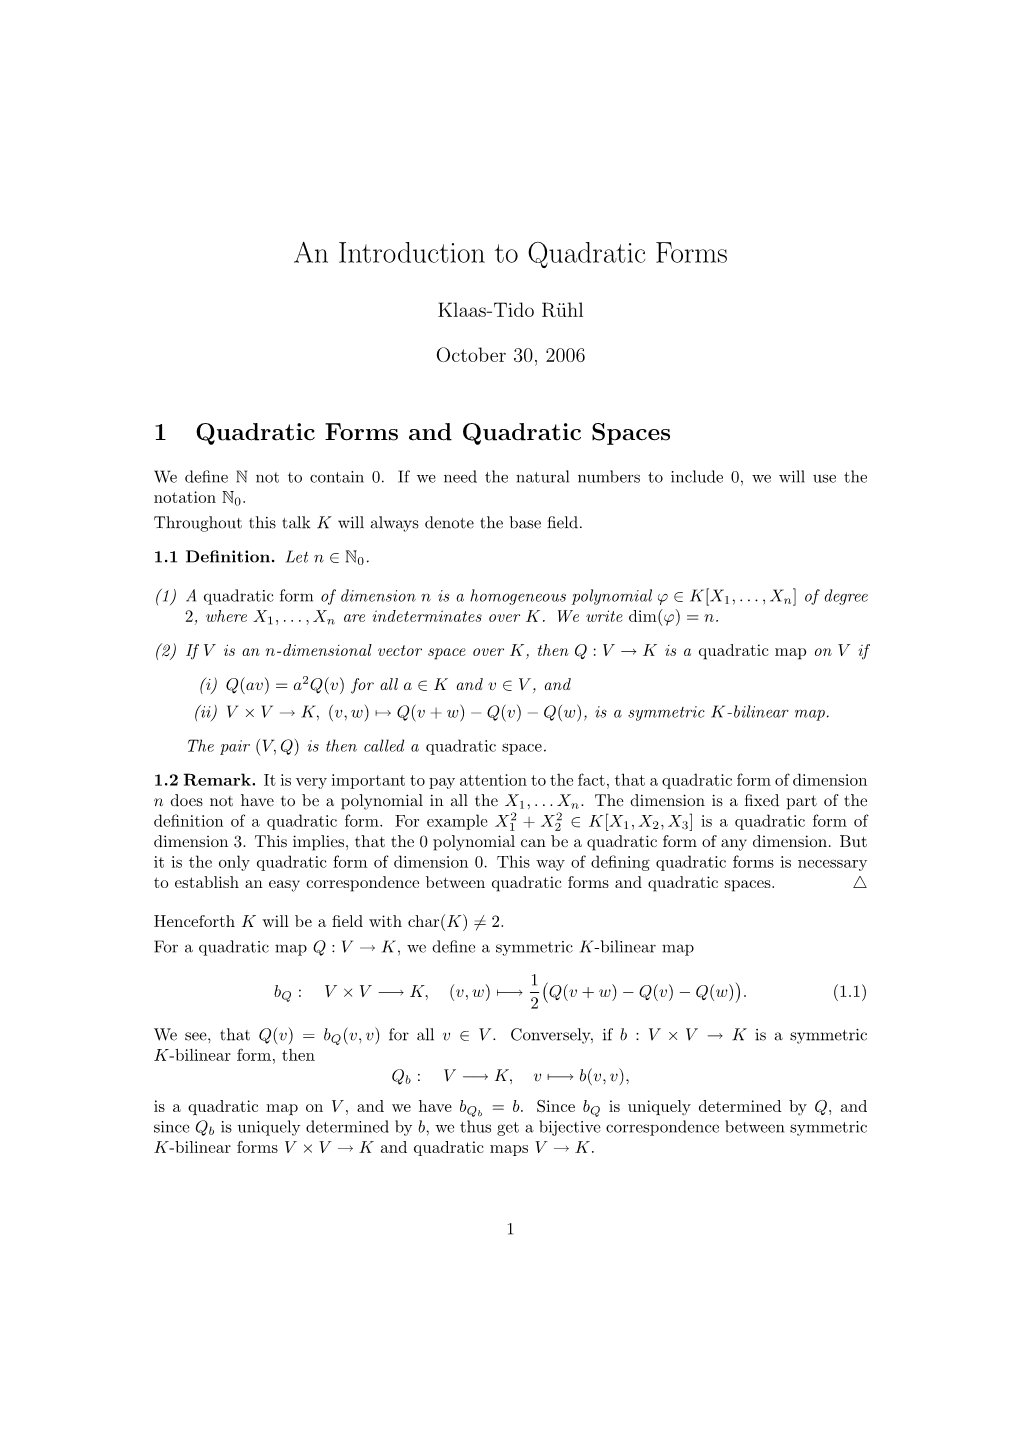 An Introduction to Quadratic Forms